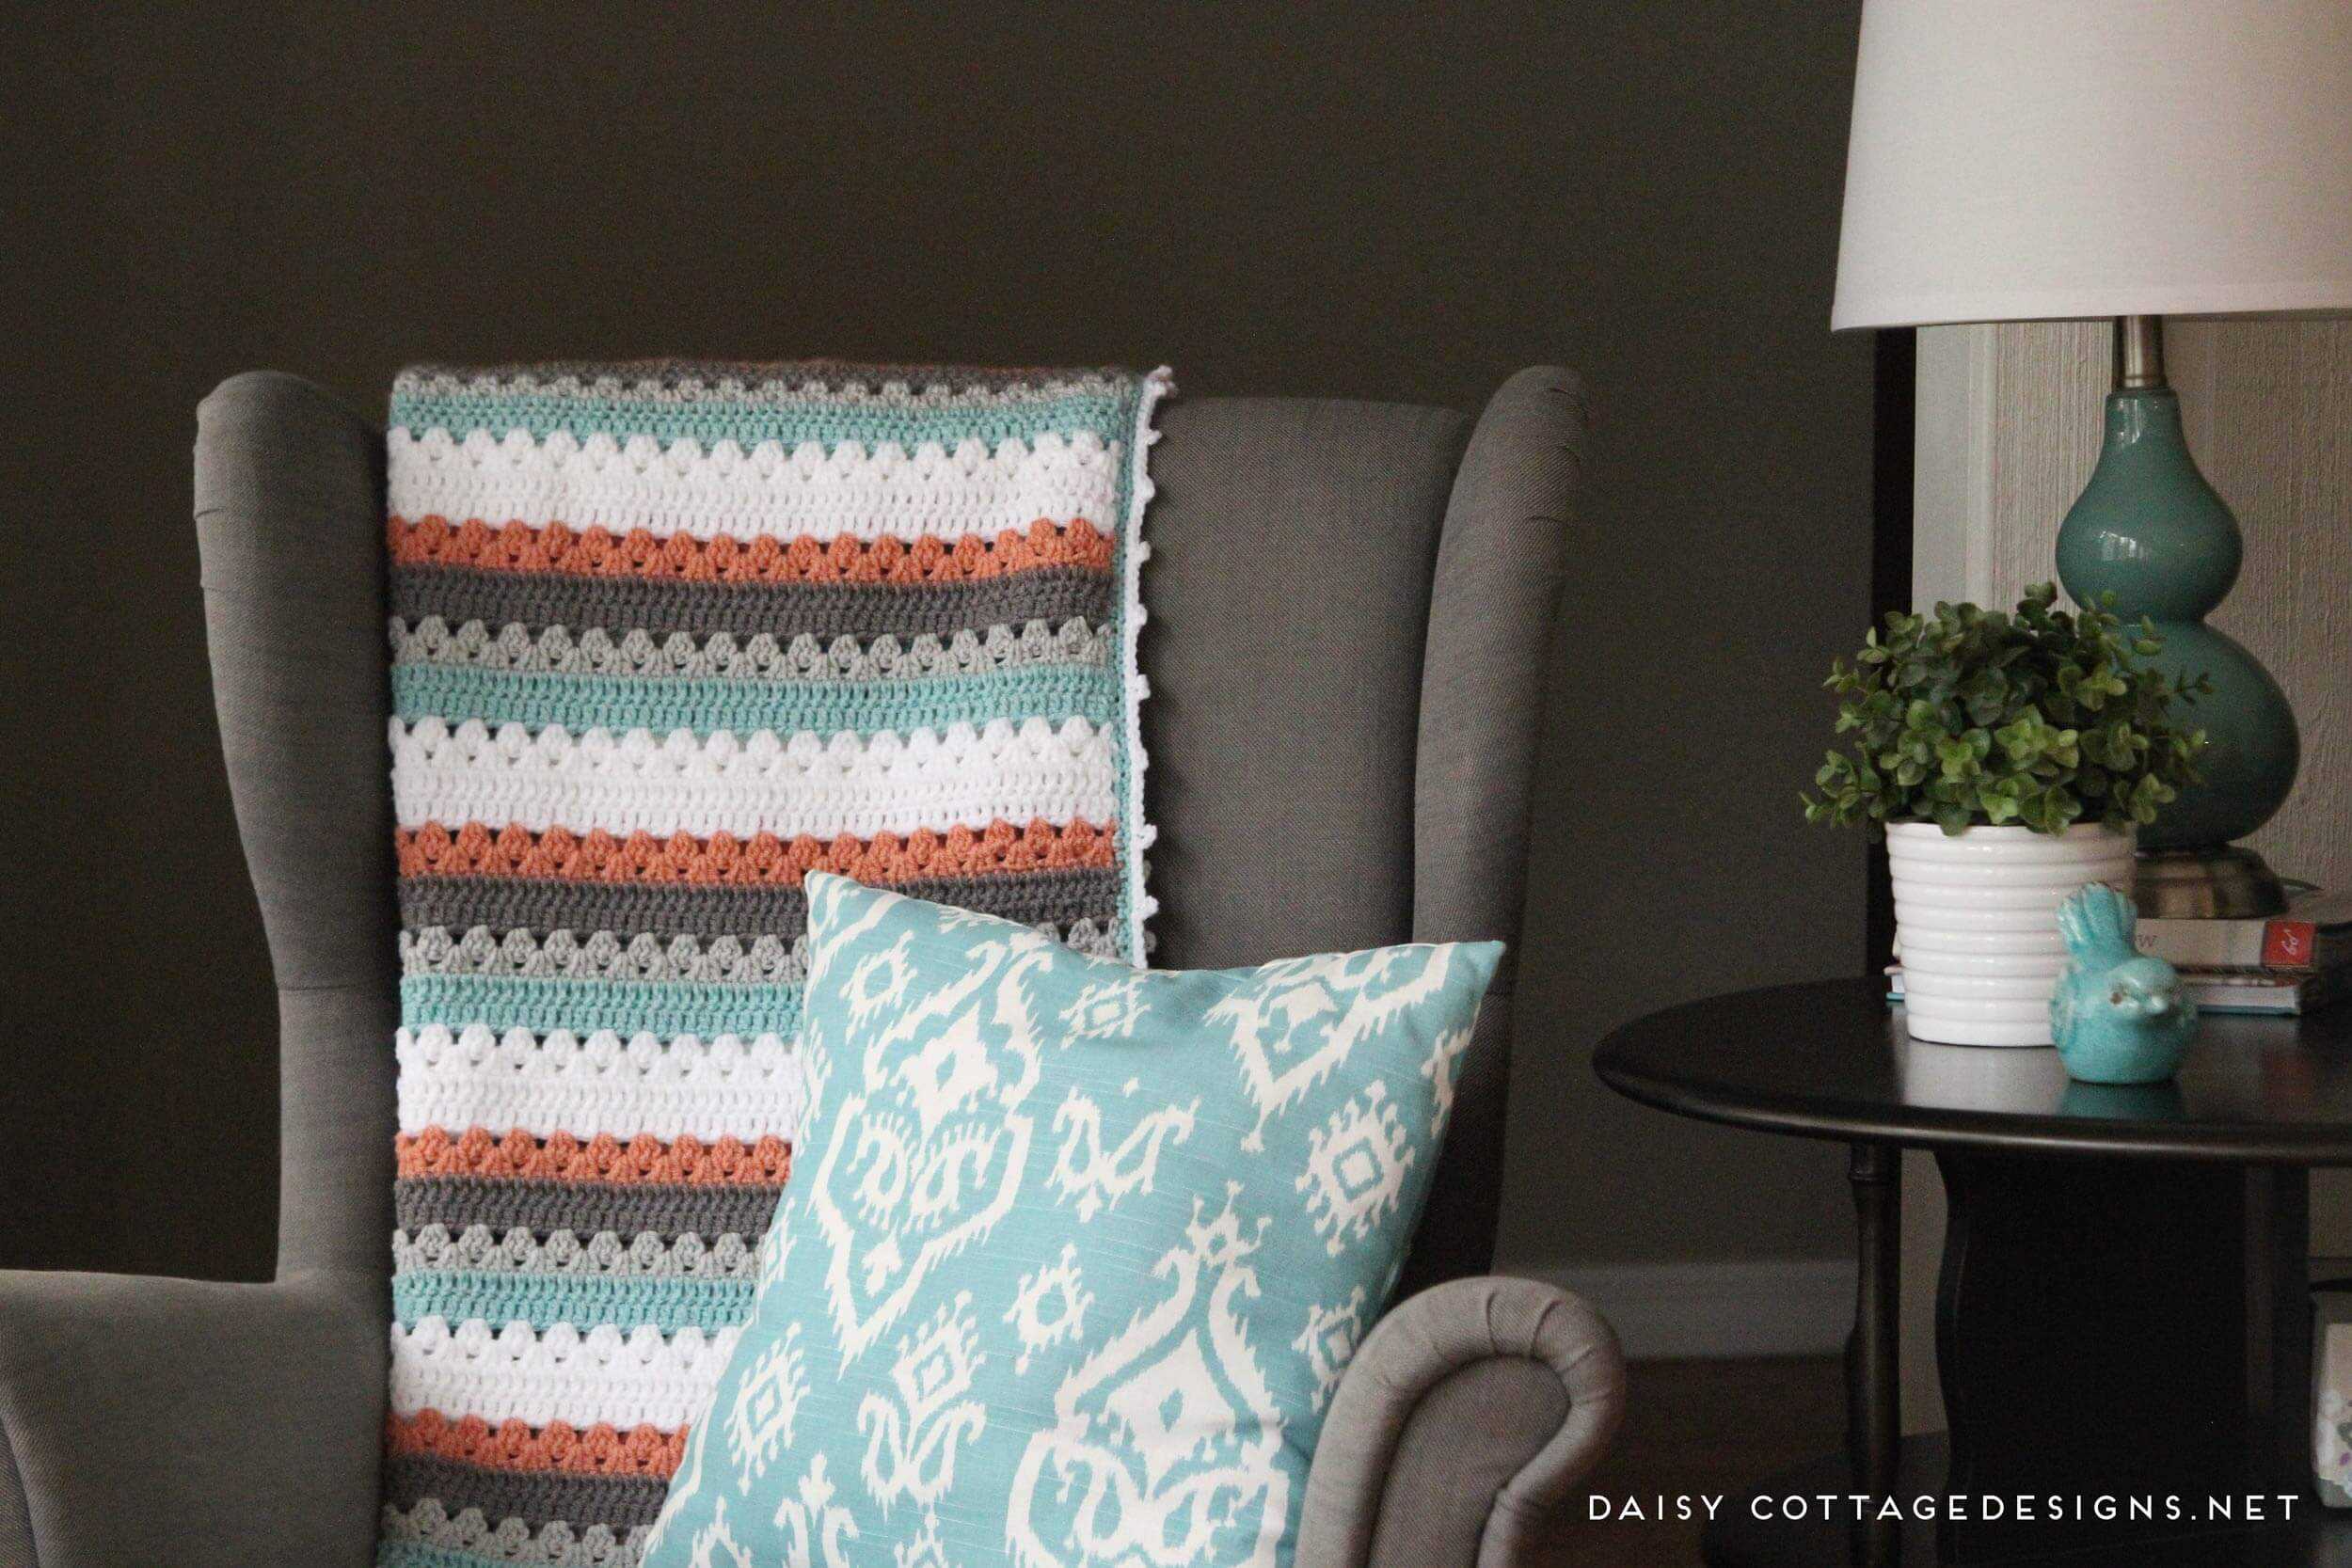 Use this blanket crochet pattern from Daisy Cottage Designs to create a beautiful afghan in any color way. | free crochet pattern, easy crochet pattern, free blanket crochet pattern, granny stripe crochet pattern